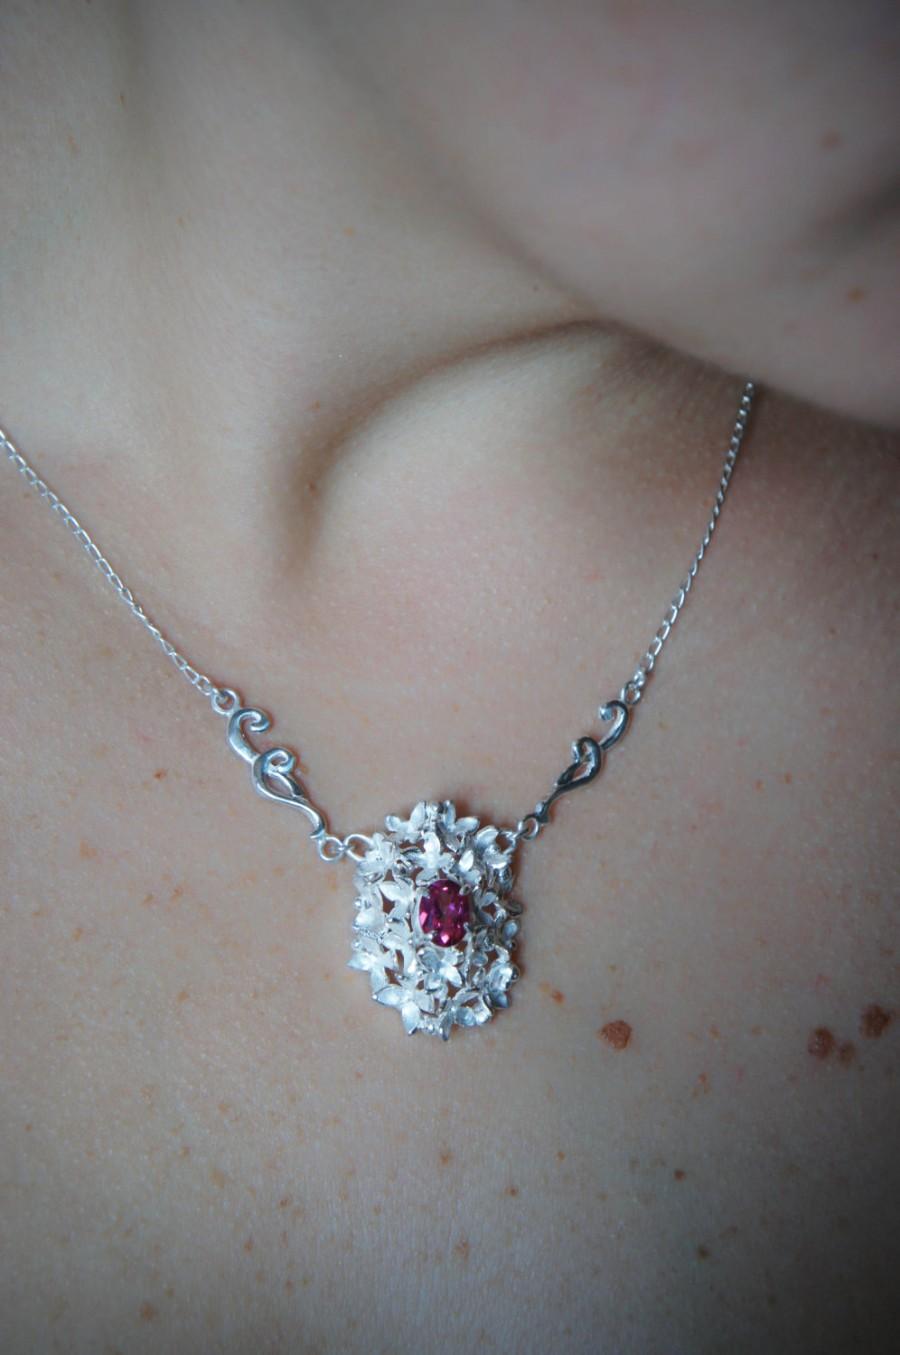 Hochzeit - Bridal necklace, flower necklace, sterling silver, pink topaz pendant, wedding necklace, bridal jewelry, floral jewelry, heirloom, romantic